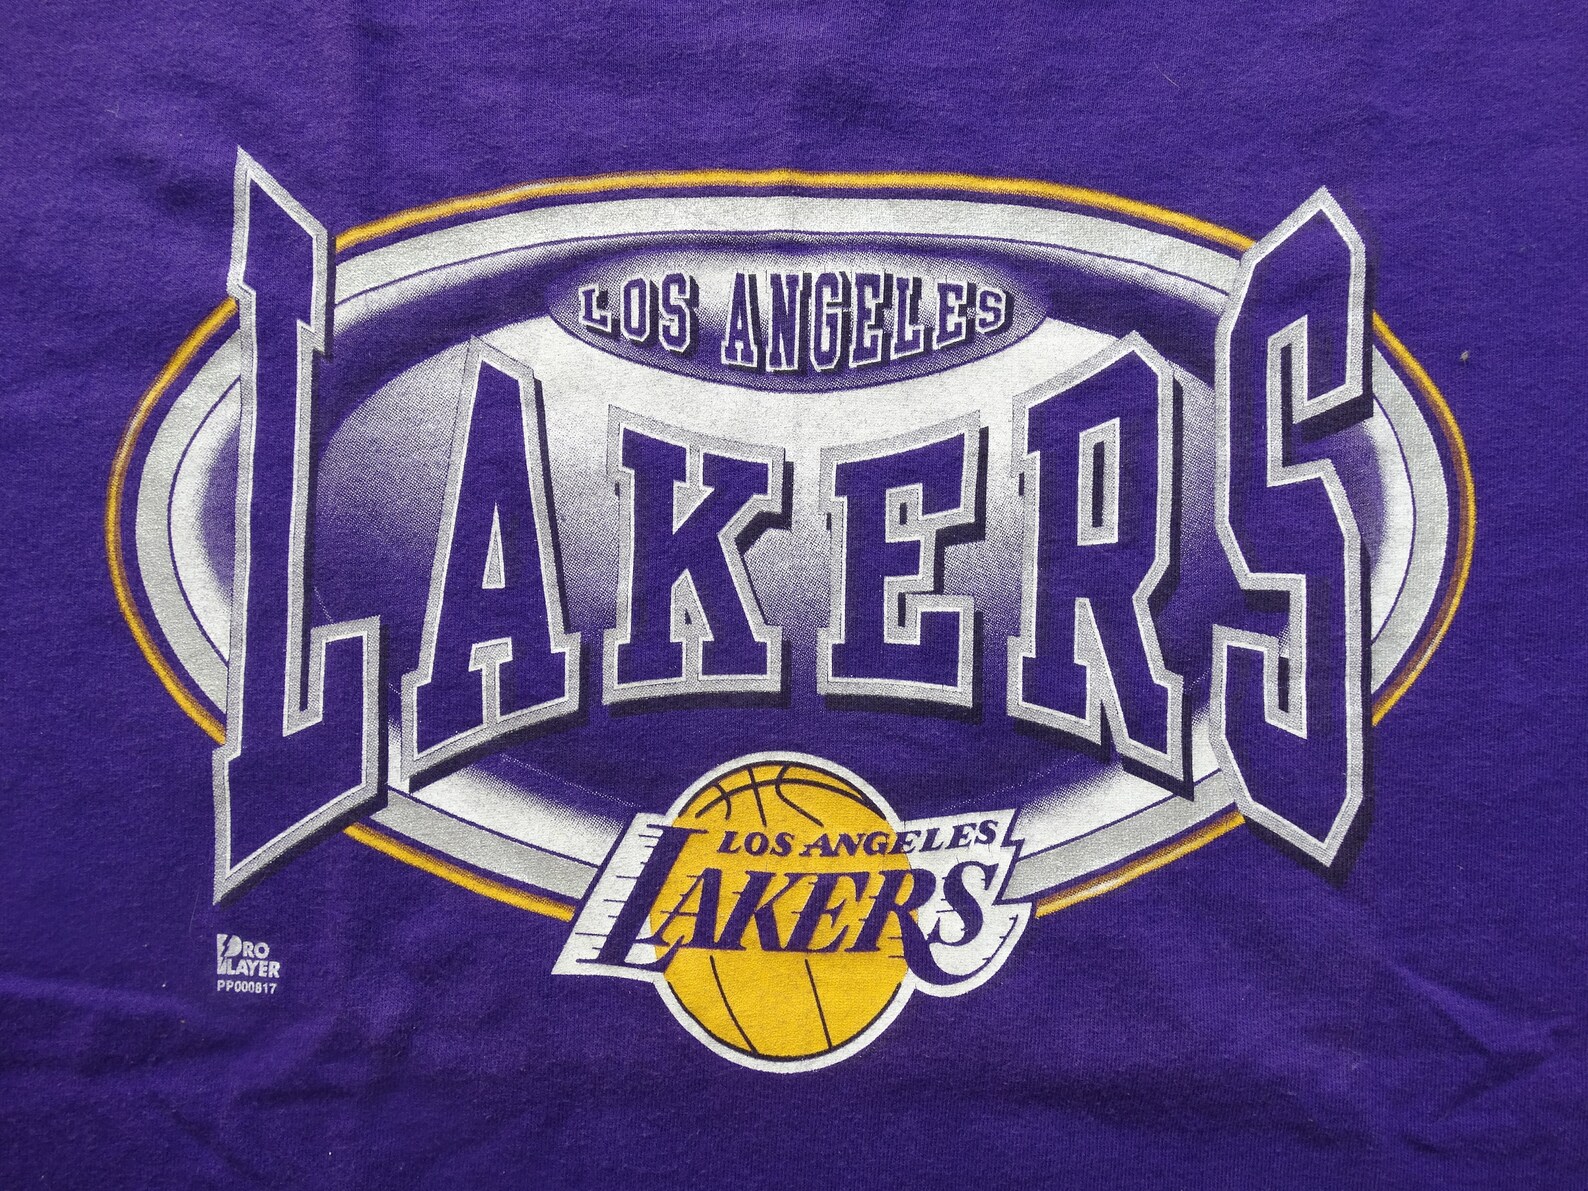 Los Angeles Lakers Basketball Team Vintage 90s Shirt CHICAGO | Etsy